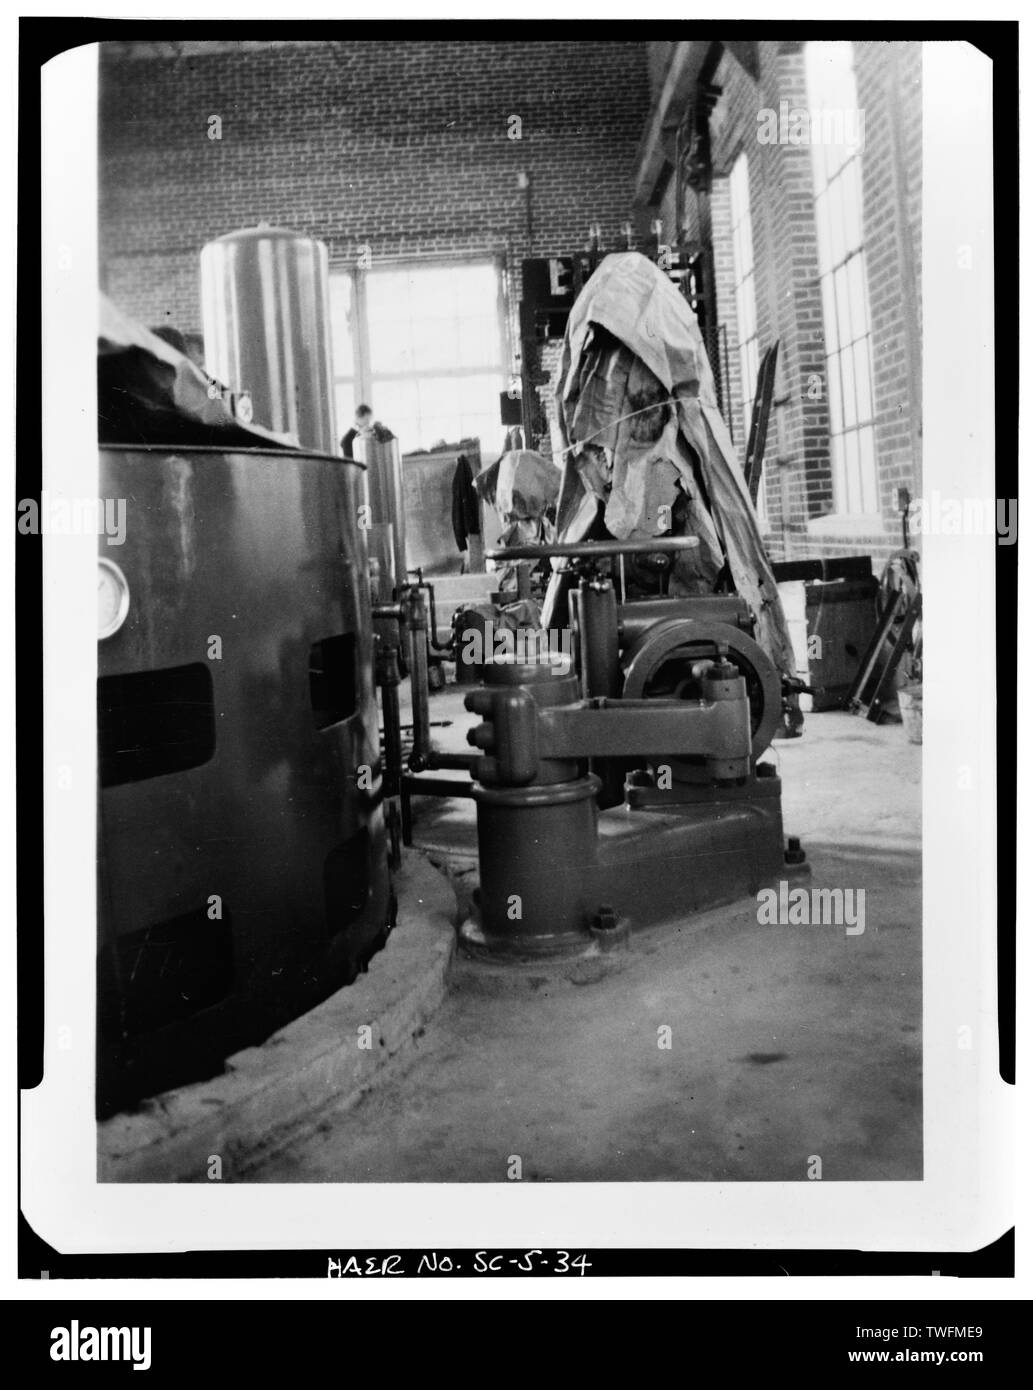 POWER PLANT INTERIOR, GENERATOR INSTALLATION - Abbeville Hydroelectric Power Plant, State Highway 284 and County Road 72, Rocky River (historical), Abbeville County, SC; Abbeville Water and Electric Plant Company; Pennell, James Roy; White, W H; Abbeville Power Company Incorporated; D.M. Rickenbacker Construction Company; Townsend, C P; Wideman and Singleton; Britton, John B; S. Morgan Smith Company; Woodward Governor Company; Bethlehem Steel Company; Westinghouse Corporation; Bush Sulzer Brothers Company; Mark Brothers; Cary, Brian, transmitter Stock Photo